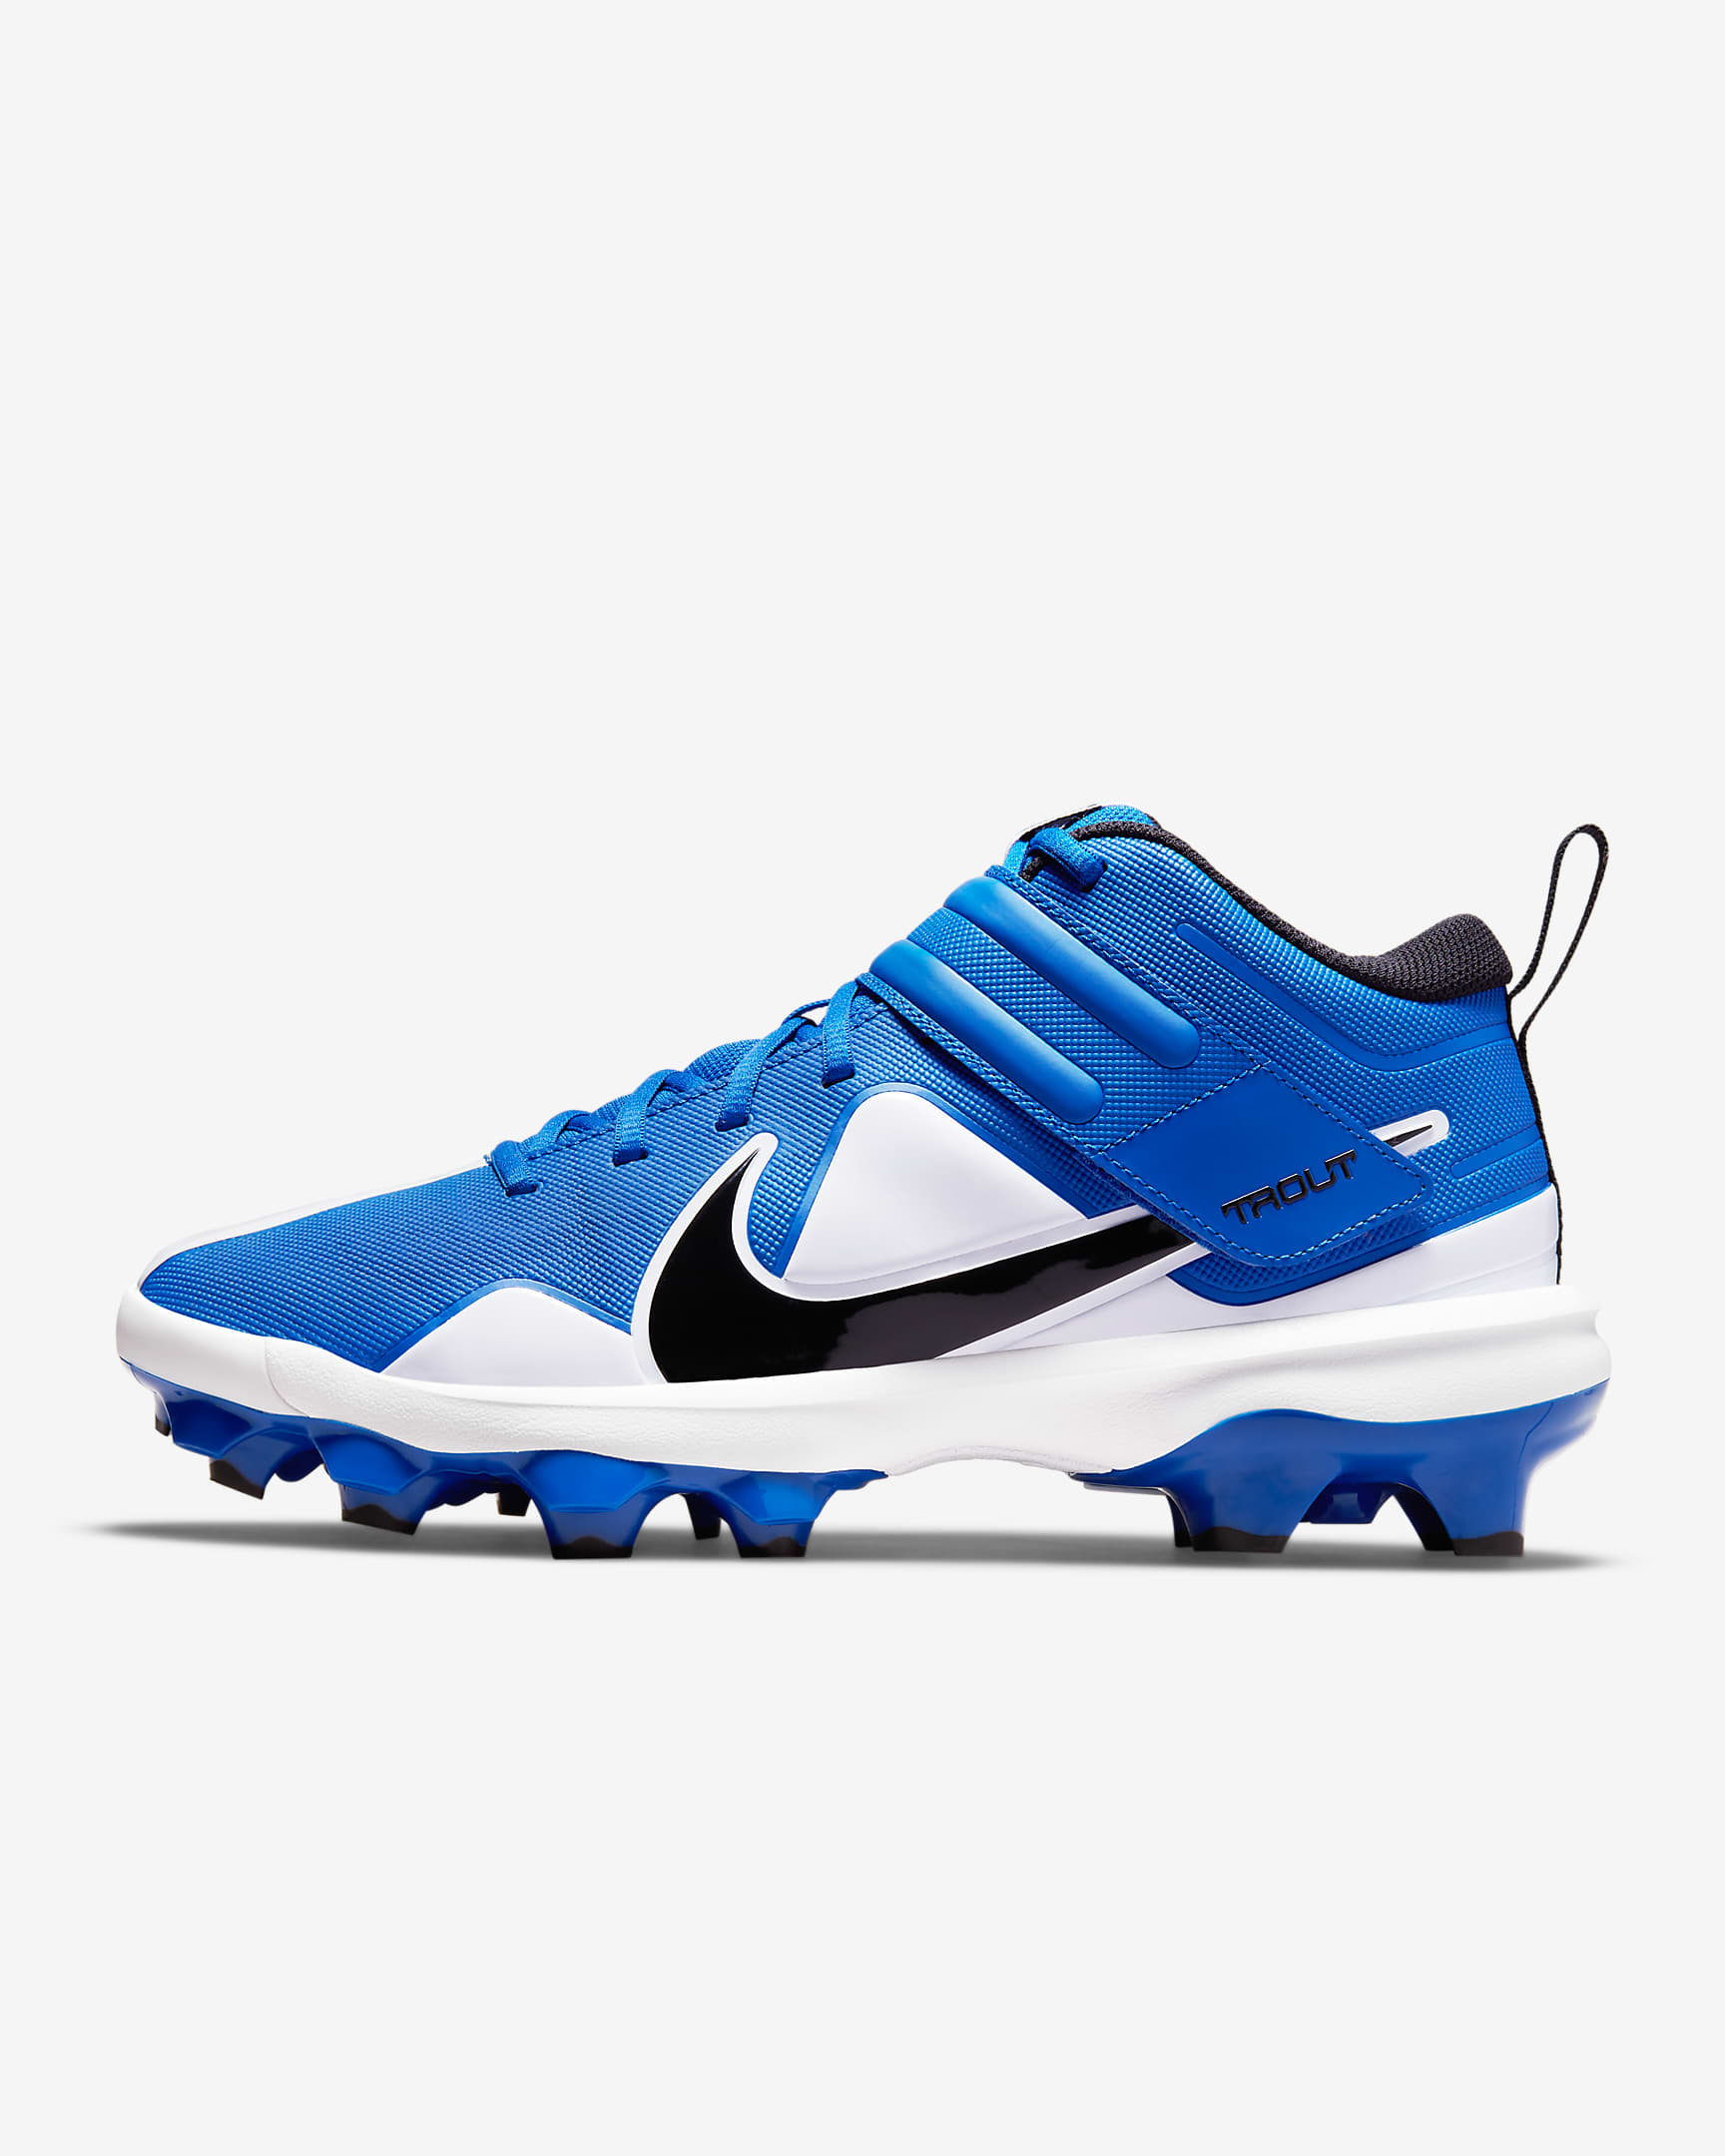 force-trout-7-pro-mcs-mens-baseball-cleats-Thr1gM.png